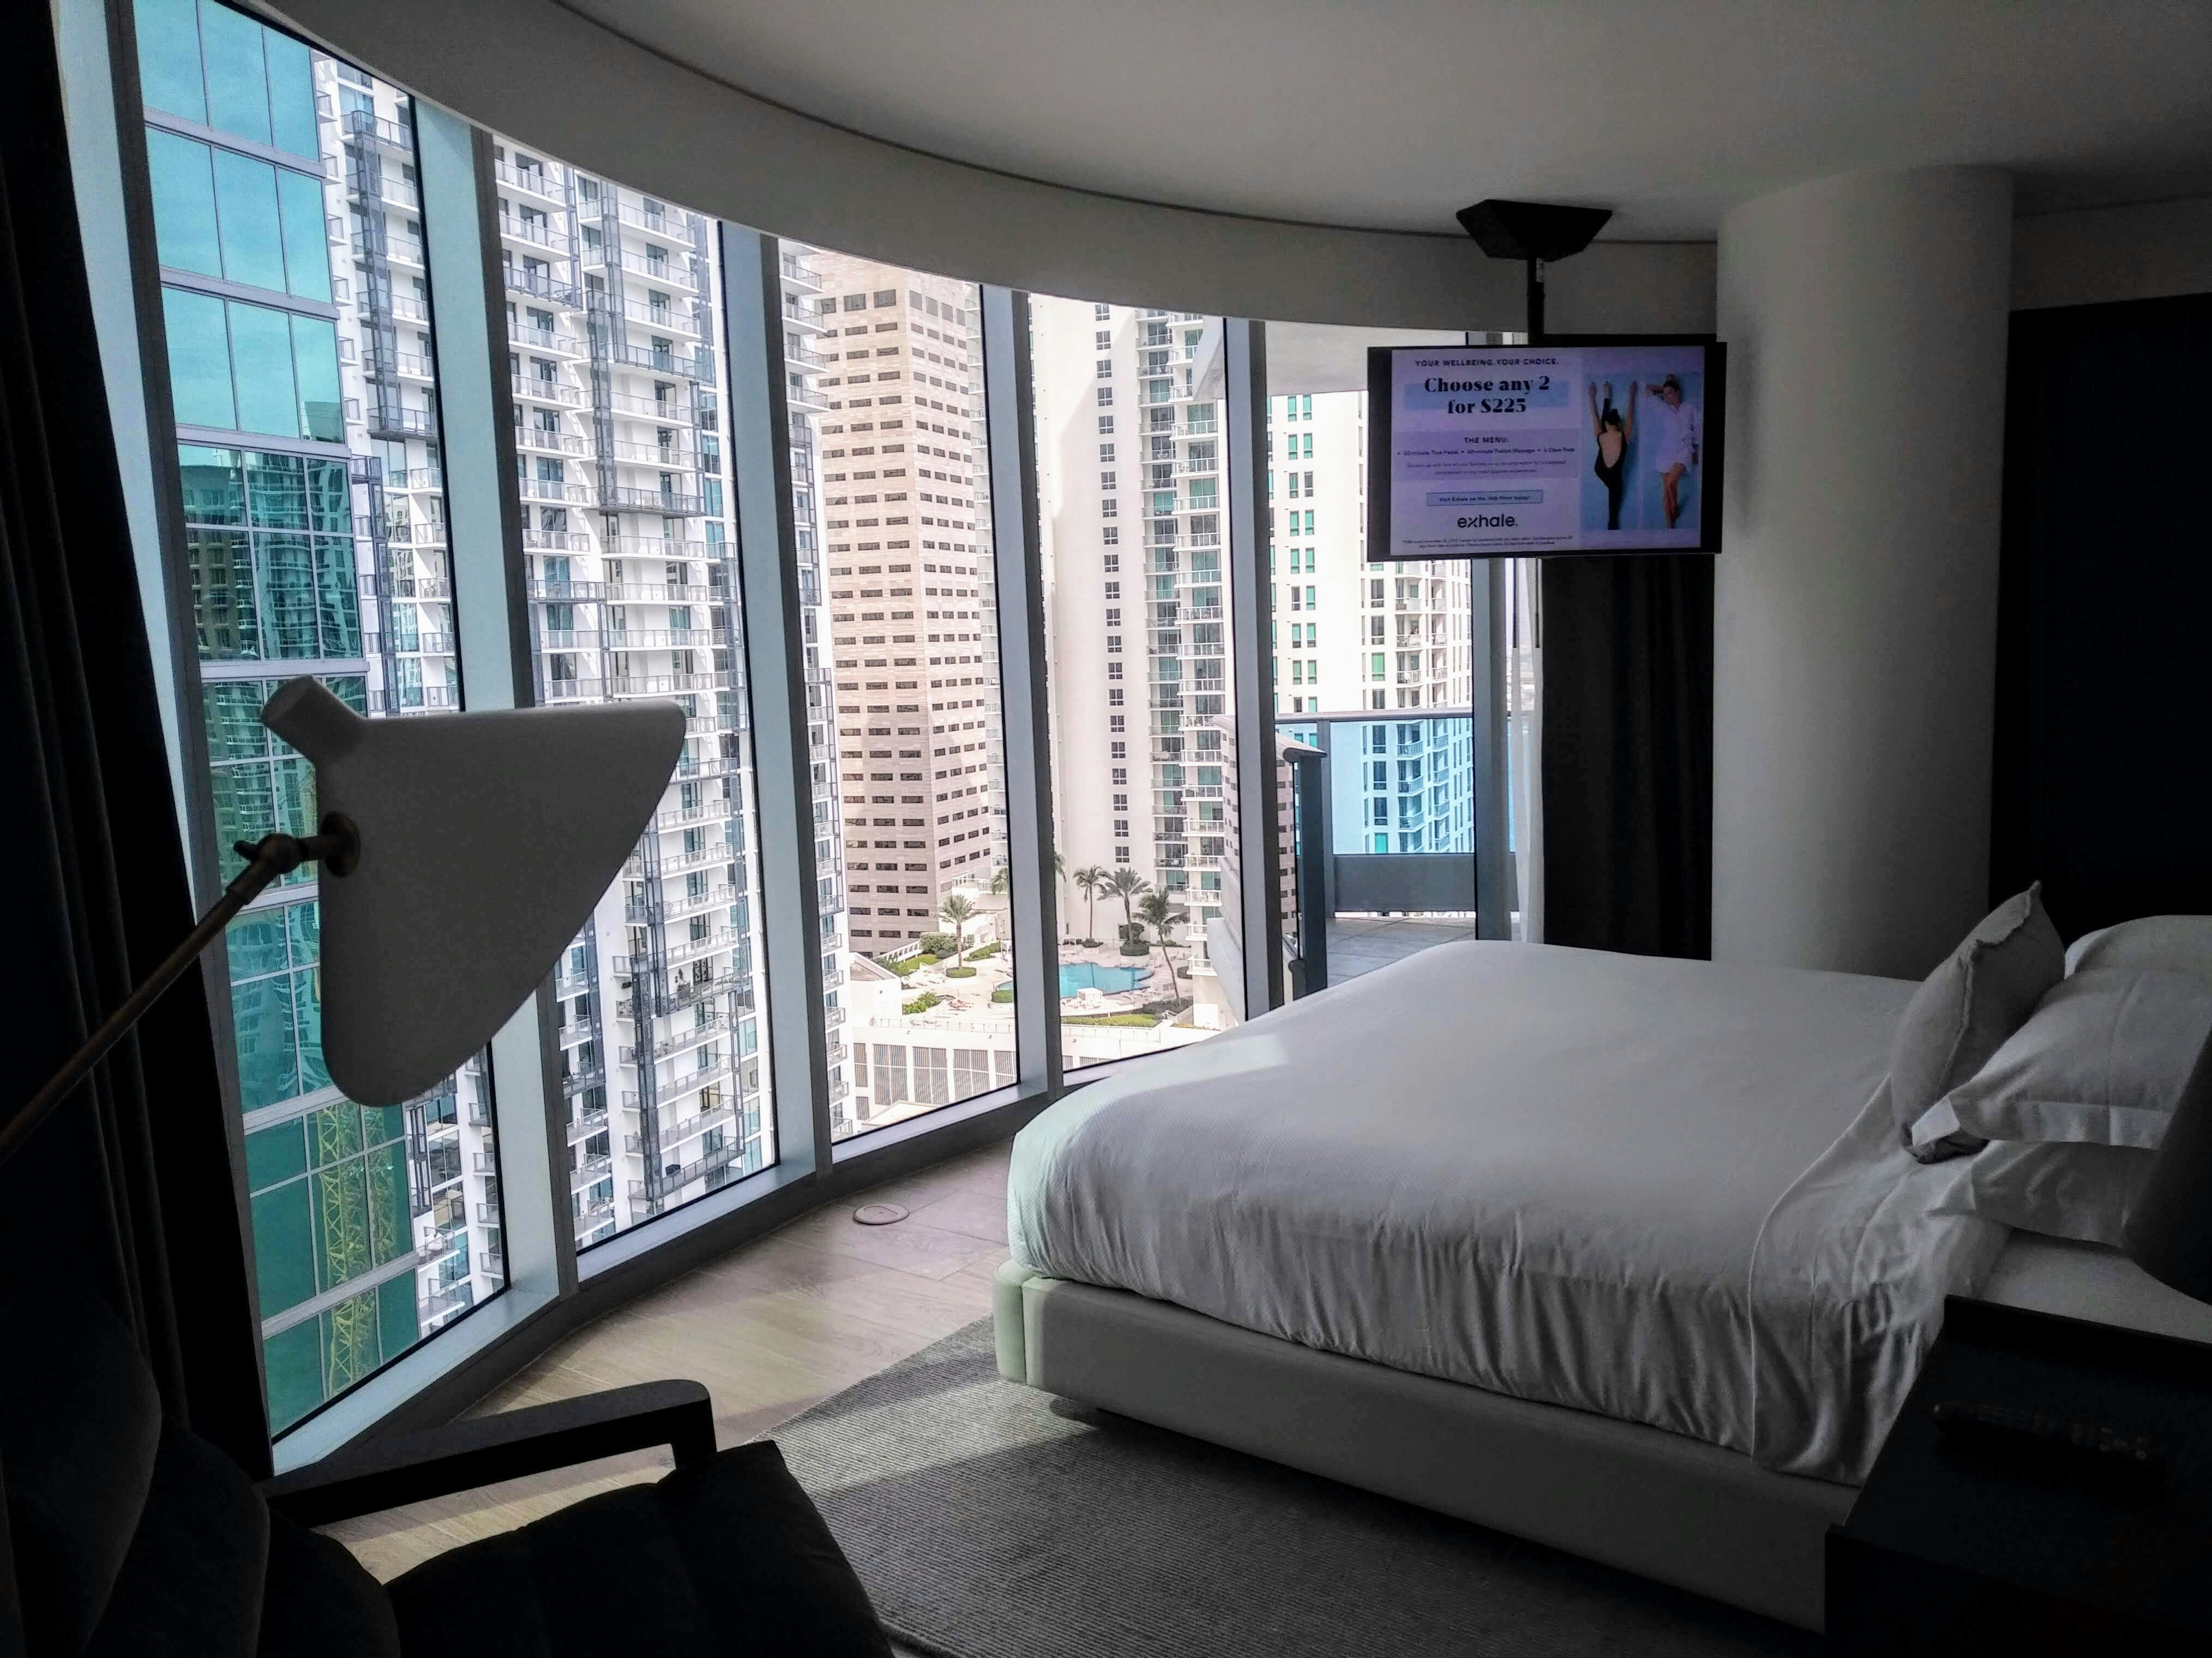 A room at the Kimpton Epic hotel in Miami has a curved class wall made up of five narrow rectangular panes overlooking a sea of skyscrapers outside. Inside, a bed faces the curved window wall, made up with simple white linens on a grey woven rug. A tv is mounted to the ceiling and advertises wellness packages. A lamp and chair are just visible in the foreground.